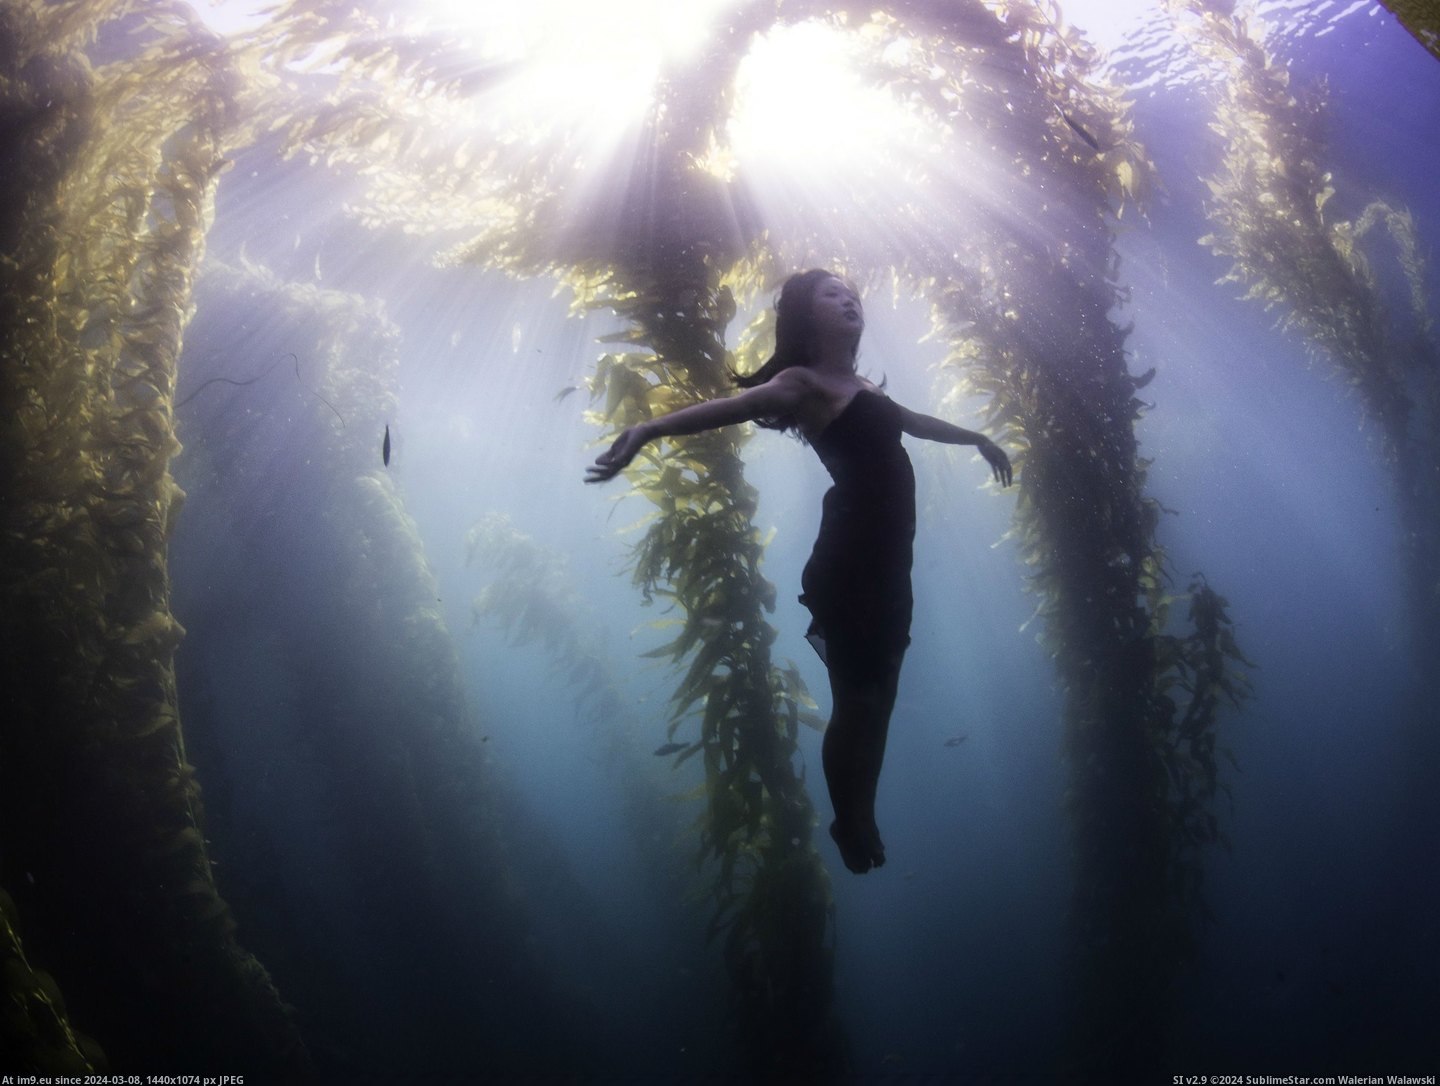 #You #Dress #Jump #Convinced #Kelp #Forest #Bought [Pics] Bought my gf a dress and convinced her to jump into the middle of a kelp forest. What do you think? Pic. (Obraz z album My r/PICS favs))